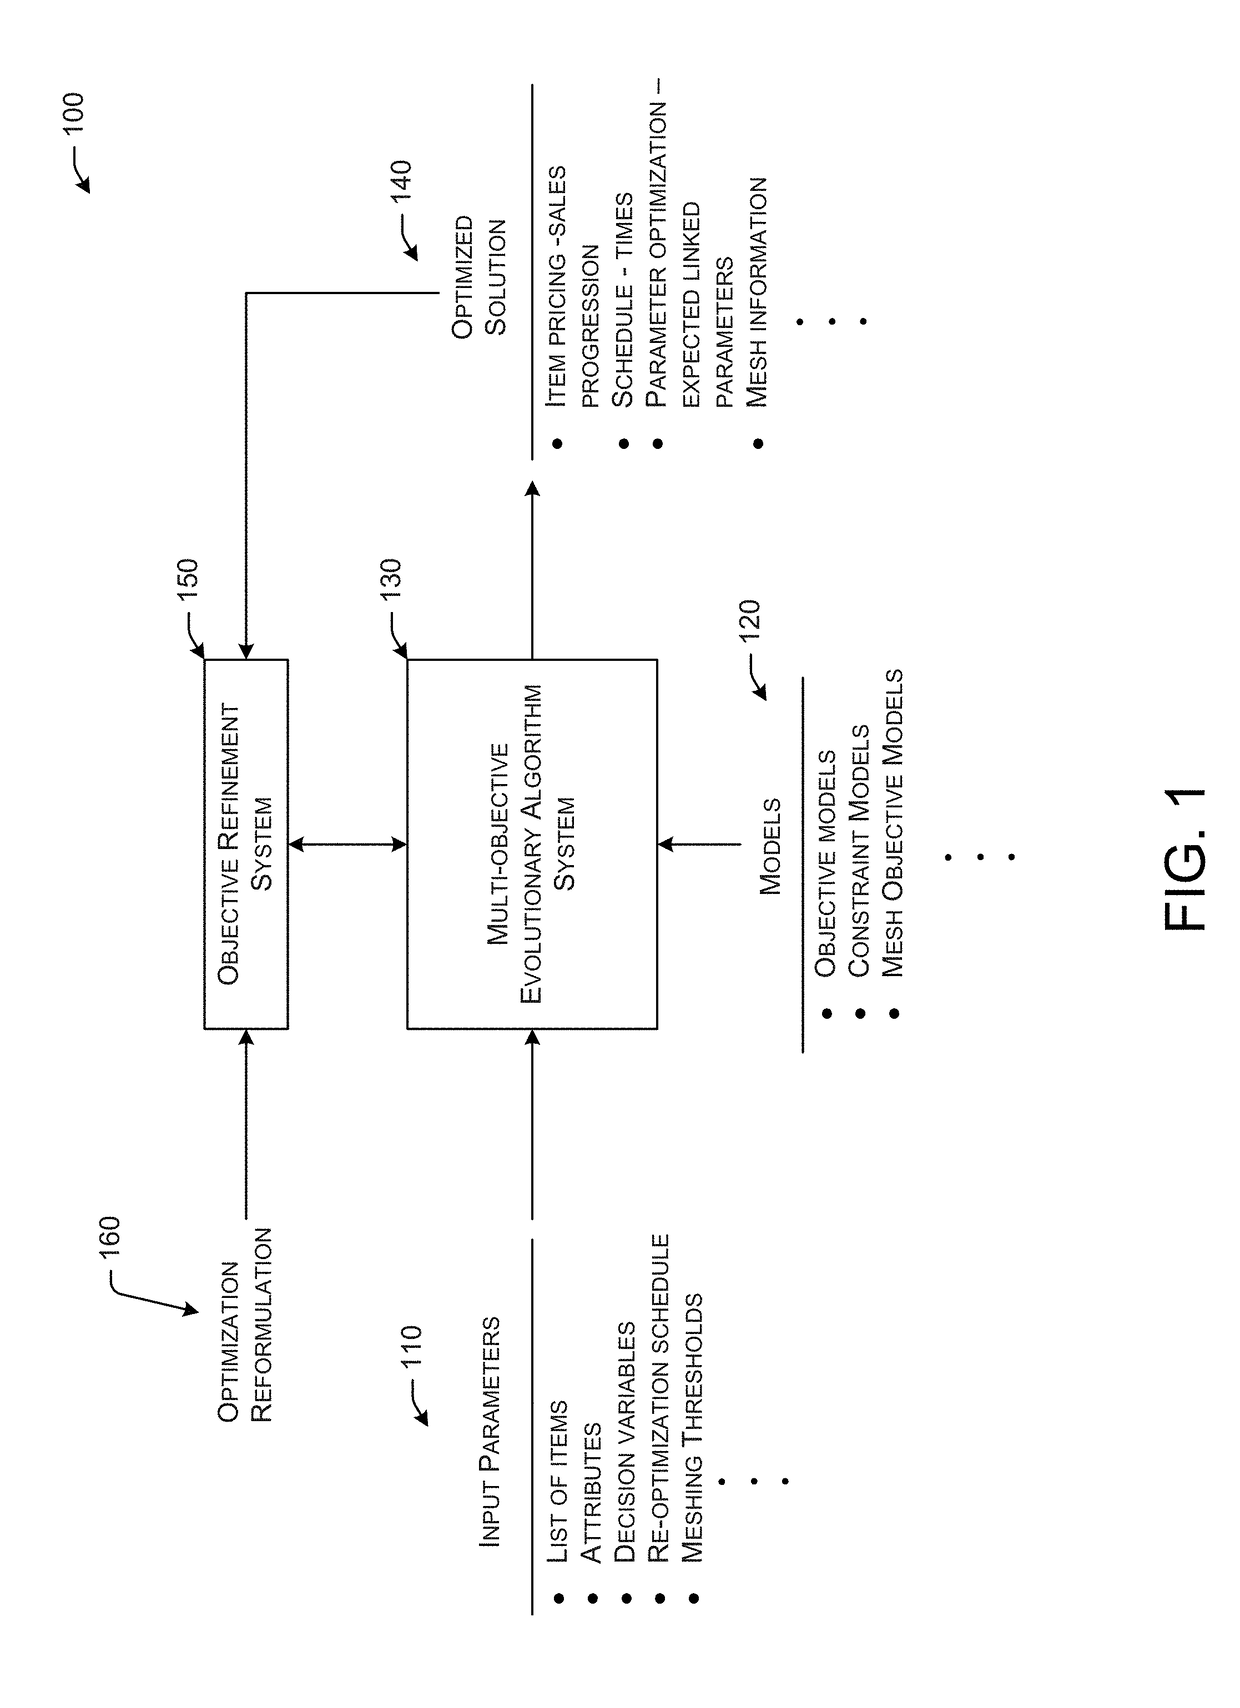 Systems and Methods for Multi-Objective Optimizations with Objective Space Mapping